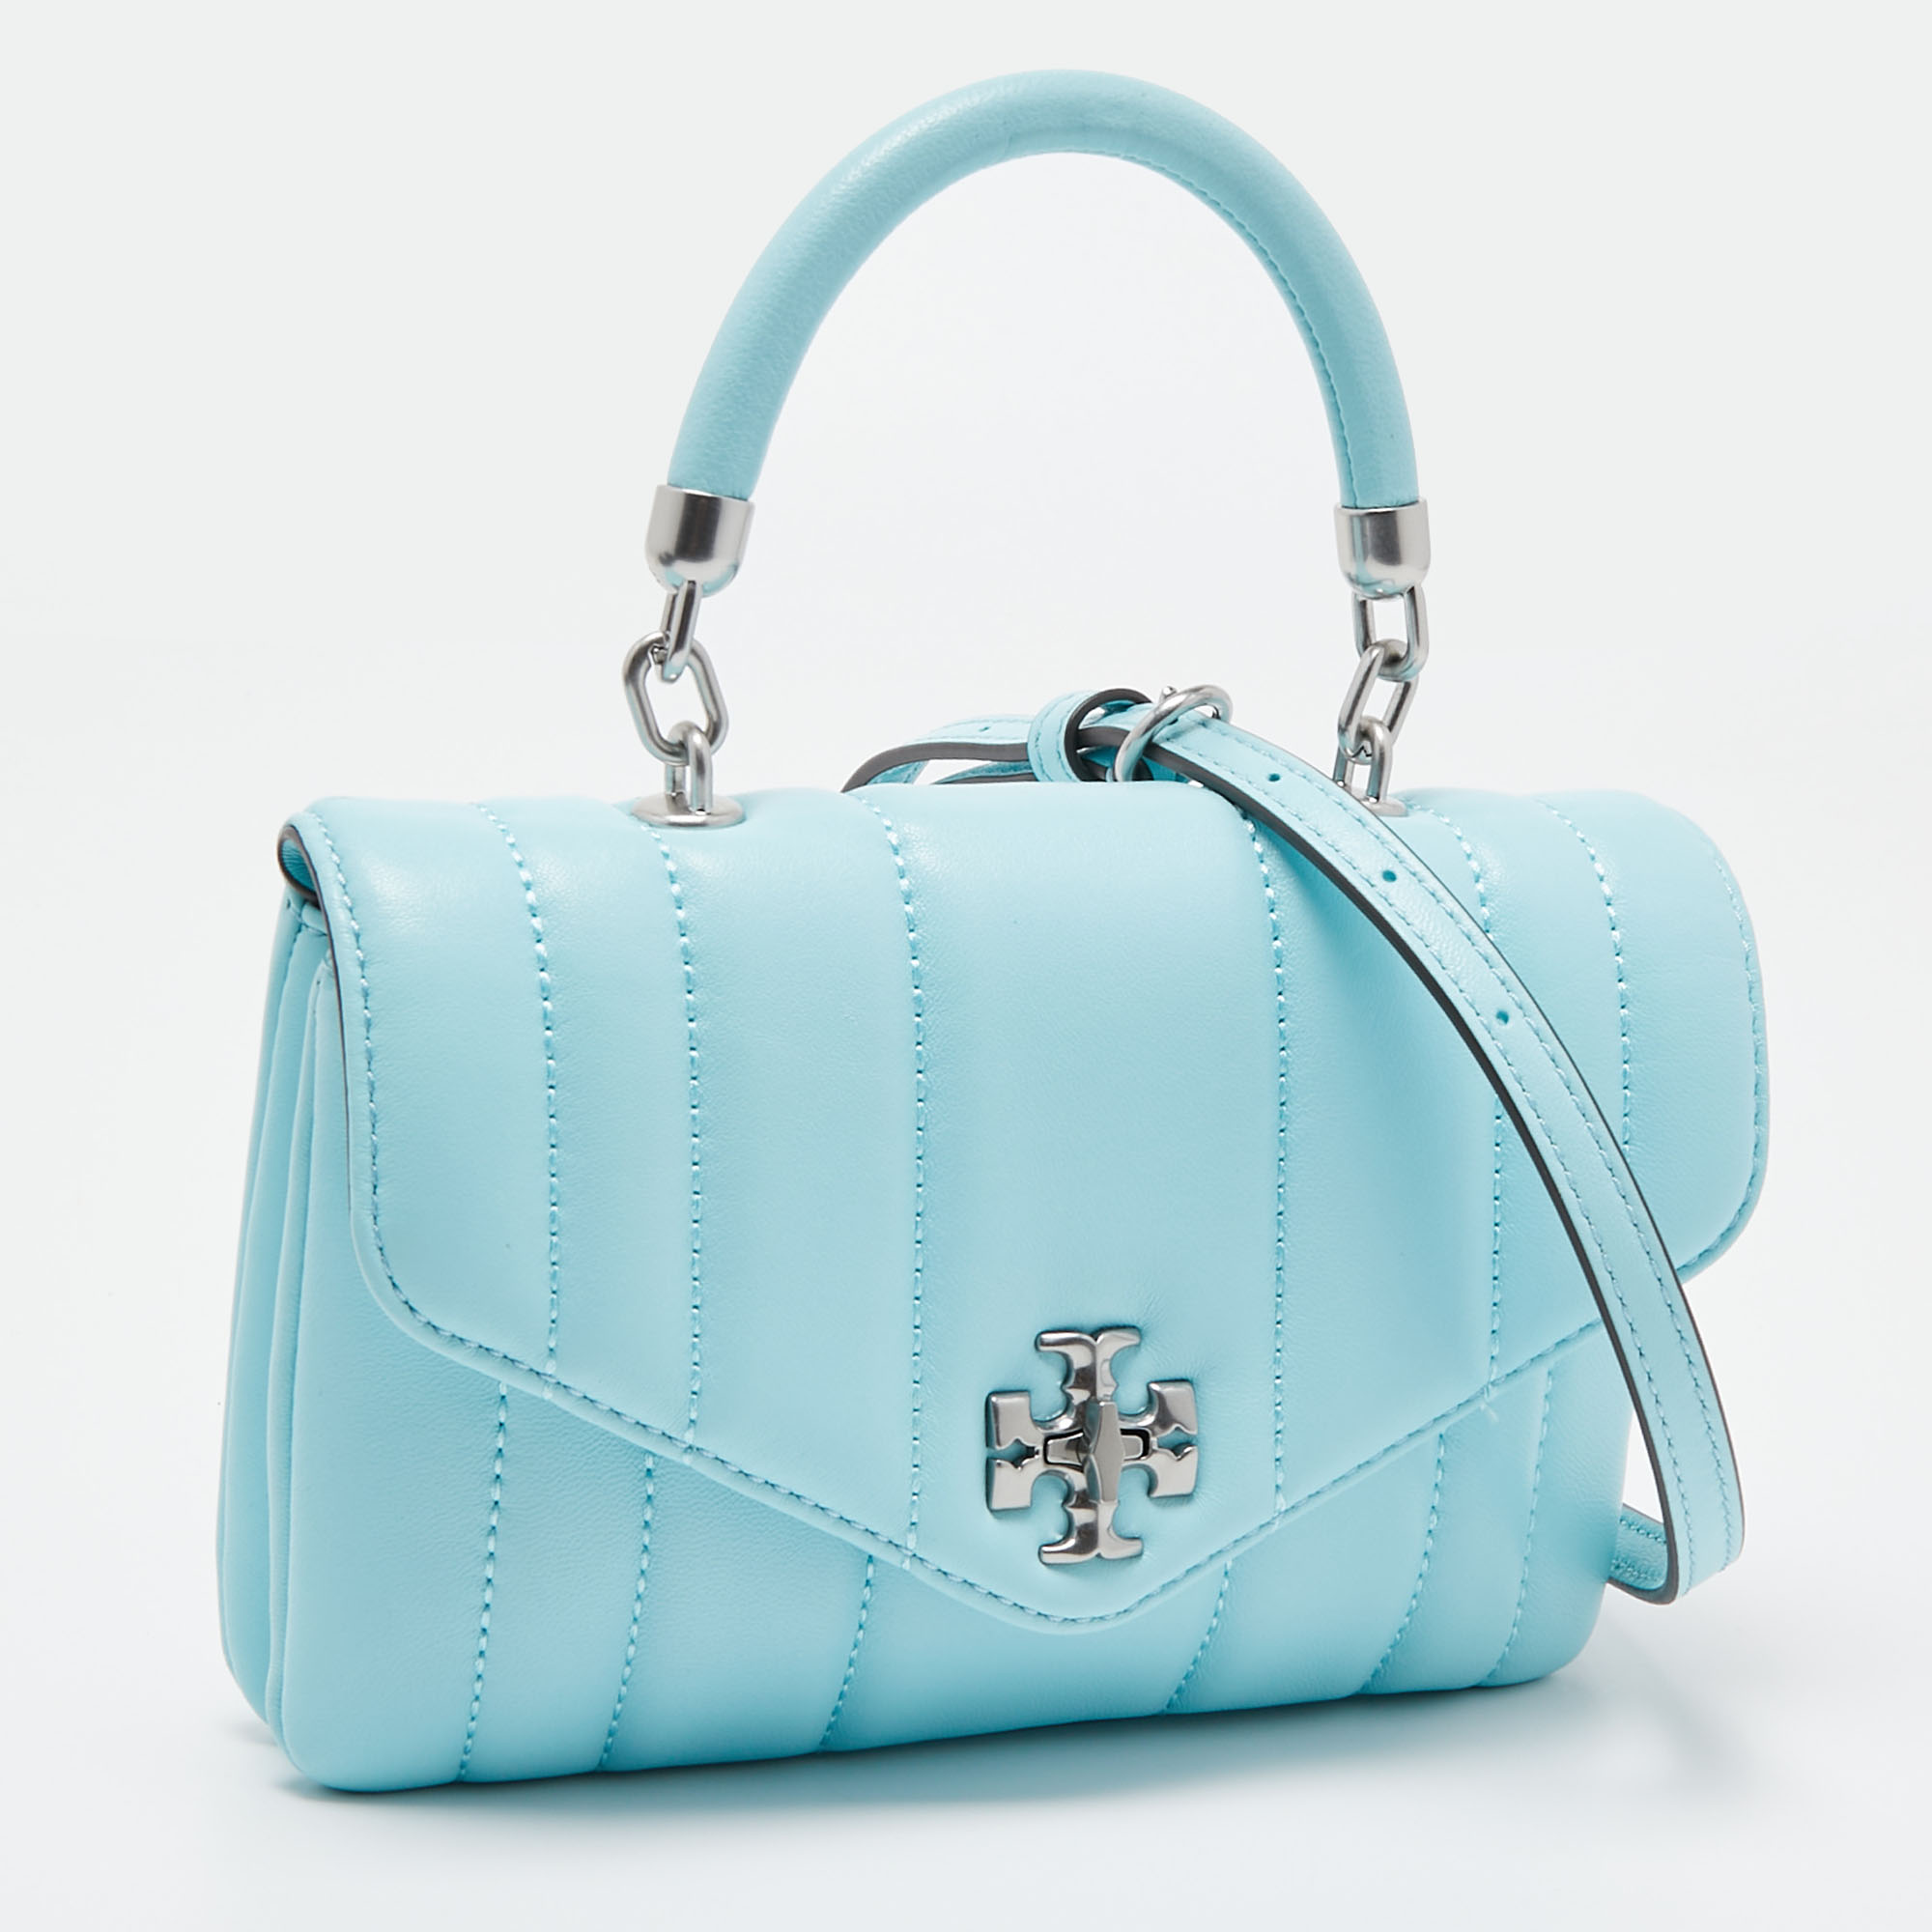 Tory Burch Light Blue Quilted Leather Kira Top Handle Bag